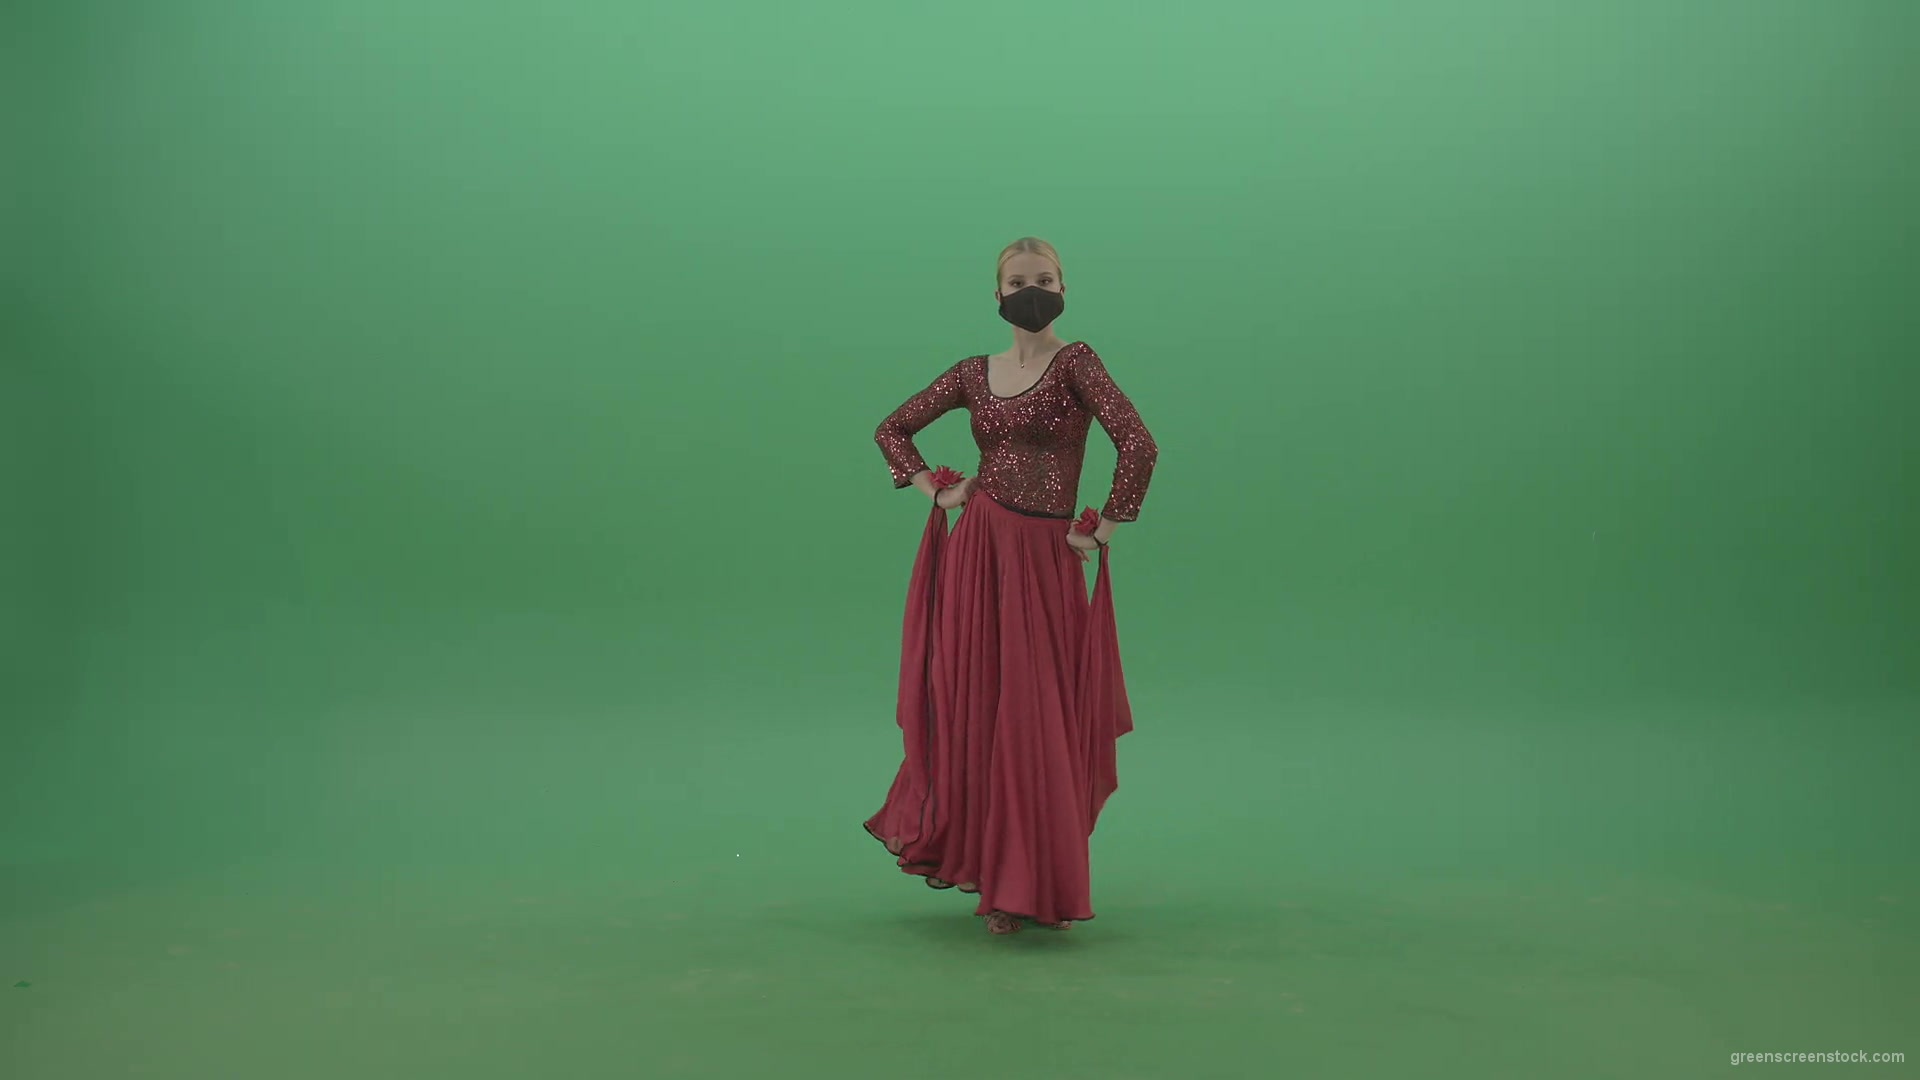 Beauty-Girl-with-black-mask-in-red-rumba-dress-waving-arms-isolated-on-green-screen-4K-Video-Footage-1920_004 Green Screen Stock